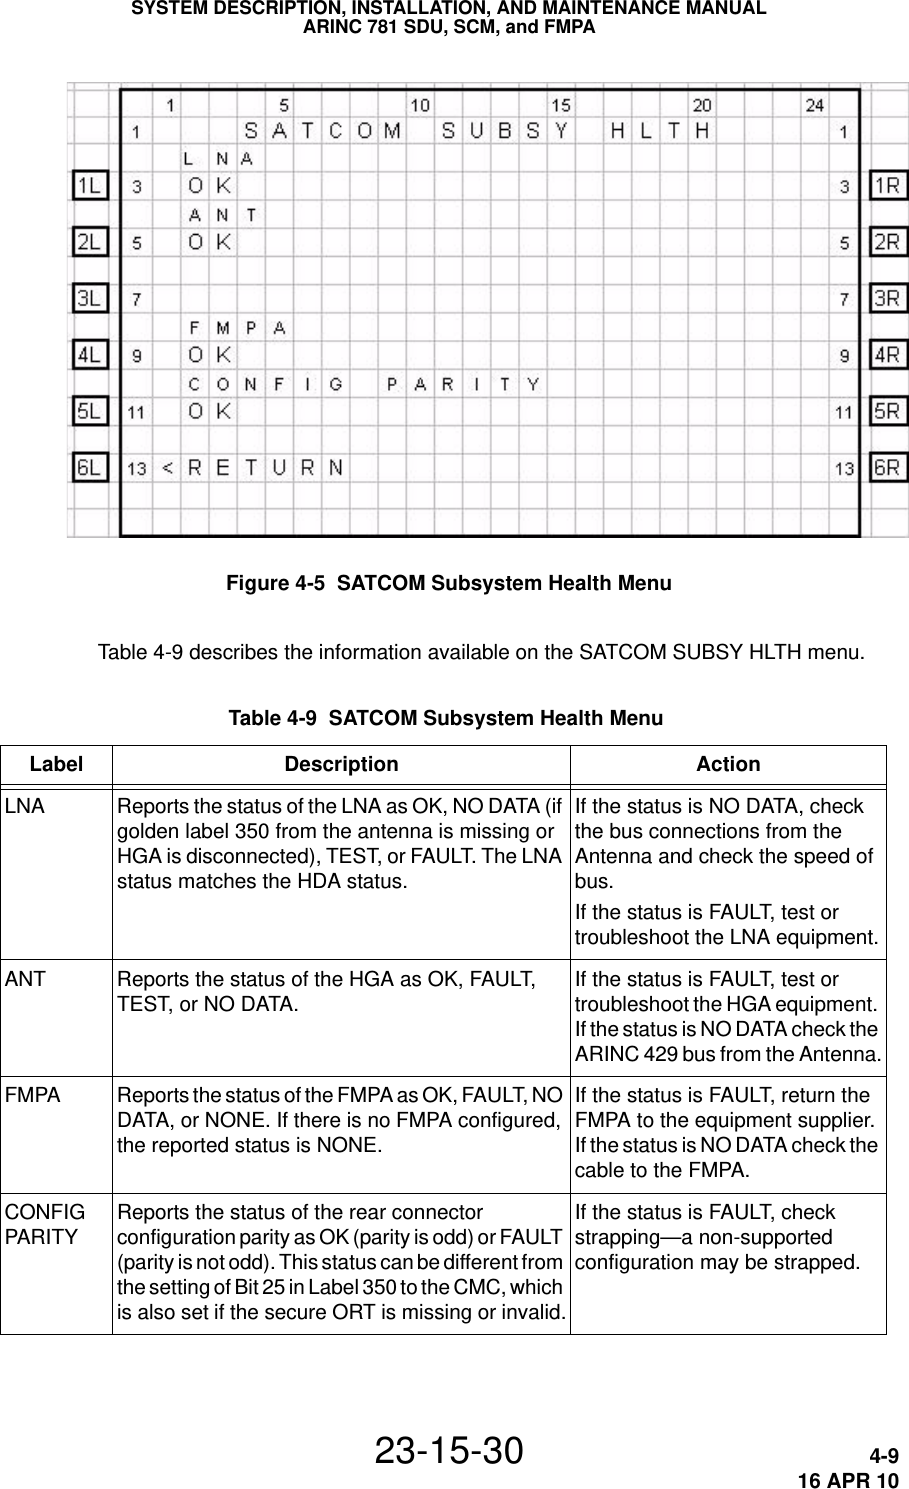 SYSTEM DESCRIPTION, INSTALLATION, AND MAINTENANCE MANUALARINC 781 SDU, SCM, and FMPA23-15-30 4-916 APR 10Figure 4-5  SATCOM Subsystem Health MenuTable 4-9 describes the information available on the SATCOM SUBSY HLTH menu. Table 4-9  SATCOM Subsystem Health Menu Label Description ActionLNA Reports the status of the LNA as OK, NO DATA (if golden label 350 from the antenna is missing or HGA is disconnected), TEST, or FAULT. The LNA status matches the HDA status.If the status is NO DATA, check the bus connections from the Antenna and check the speed of bus.If the status is FAULT, test or troubleshoot the LNA equipment.ANT Reports the status of the HGA as OK, FAULT, TEST, or NO DATA.If the status is FAULT, test or troubleshoot the HGA equipment. If the status is NO DATA check the ARINC 429 bus from the Antenna.FMPA Reports the status of the FMPA as OK, FAULT, NO DATA, or NONE. If there is no FMPA configured, the reported status is NONE.If the status is FAULT, return the FMPA to the equipment supplier. If the status is NO DATA check the cable to the FMPA.CONFIG PARITYReports the status of the rear connector configuration parity as OK (parity is odd) or FAULT (parity is not odd). This status can be different from the setting of Bit 25 in Label 350 to the CMC, which is also set if the secure ORT is missing or invalid.If the status is FAULT, check strapping—a non-supported configuration may be strapped.